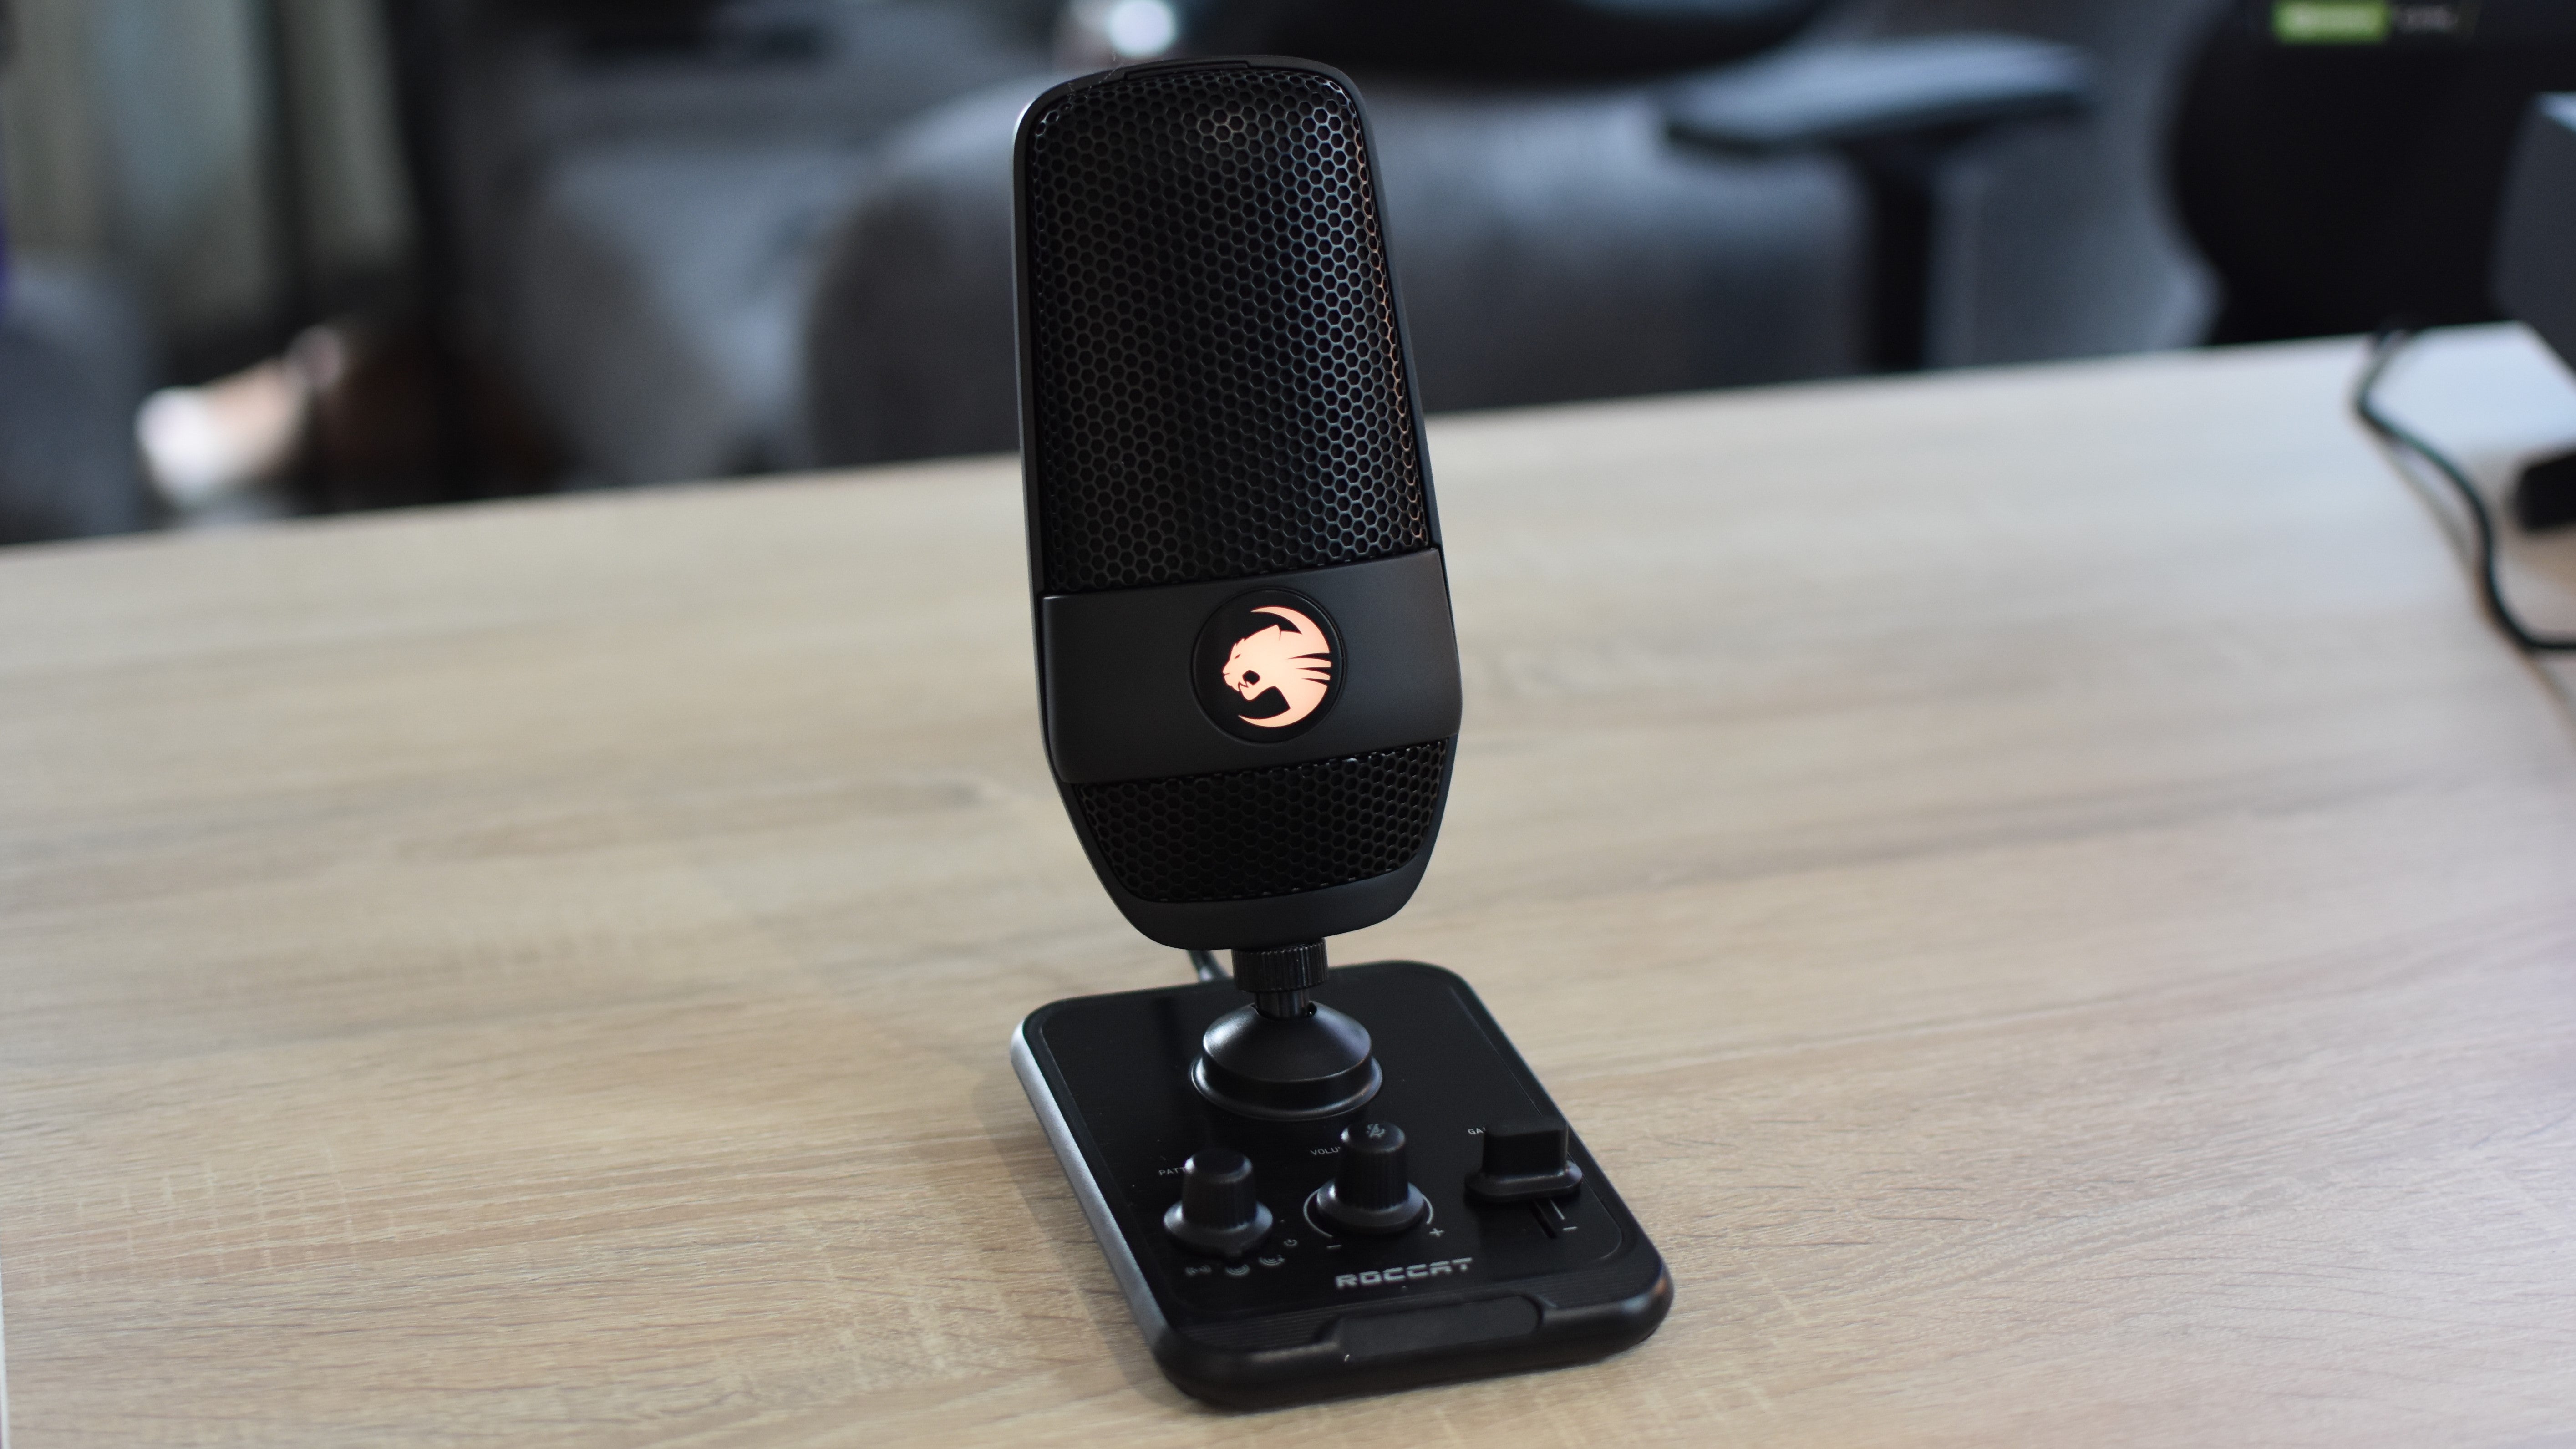 The Roccat Torch microphone on a desk.